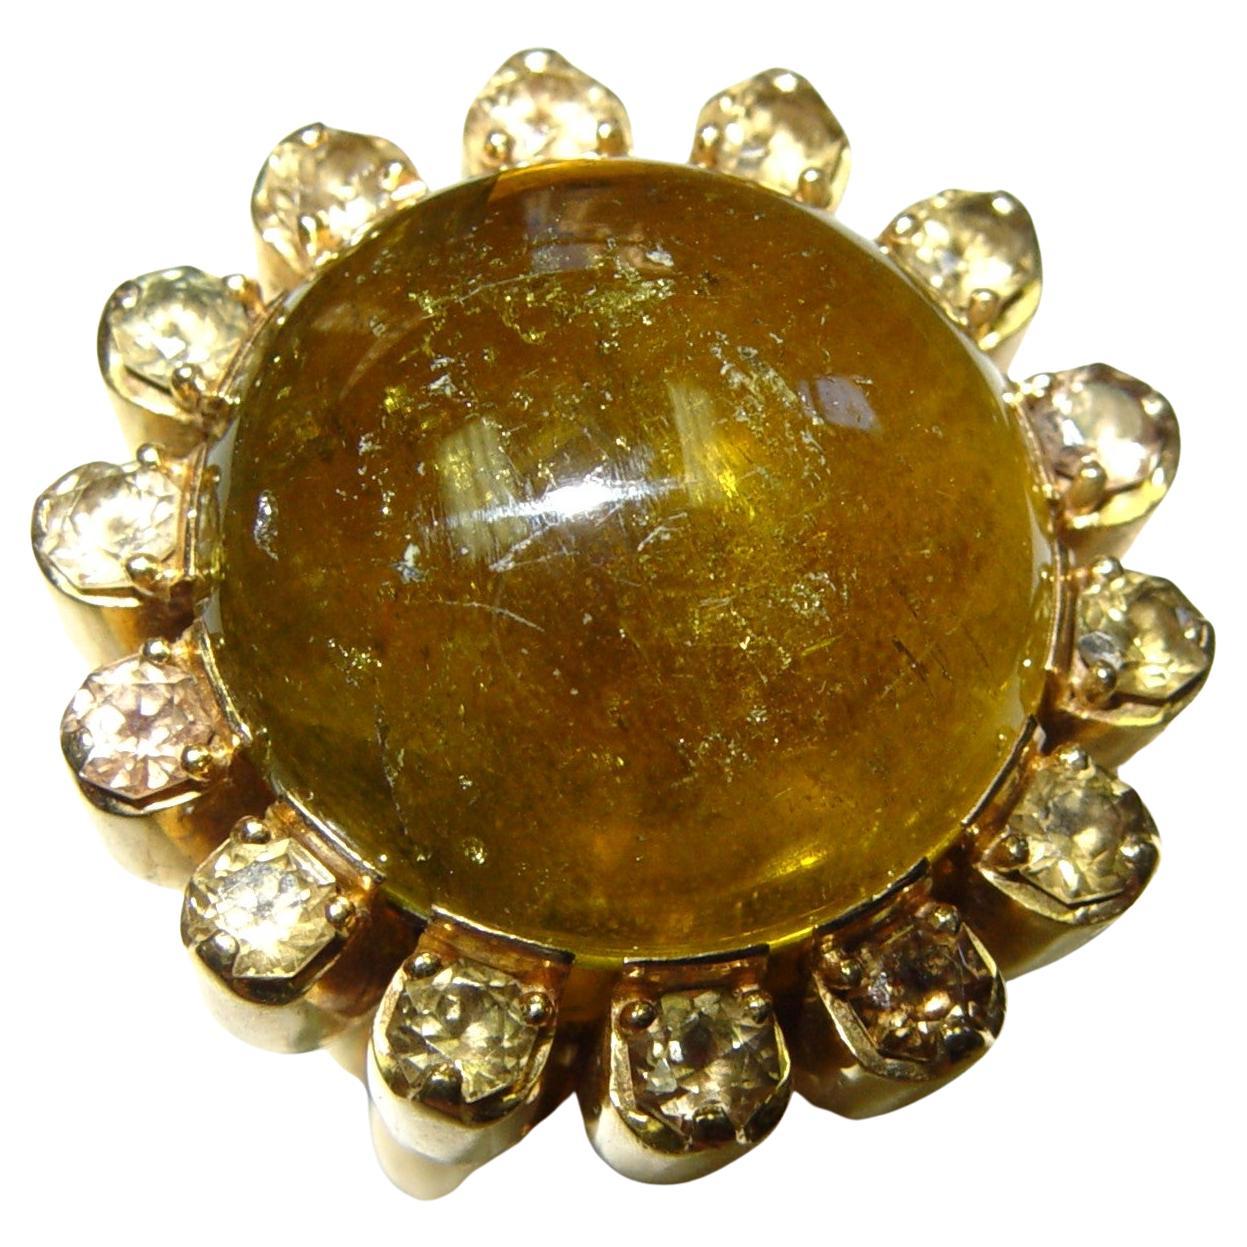 Eccentric/exaggerated ring set with One Round Cabochon Cut natural Chrysoberyl - Cat's Eye (measuring approximately 25MM in diameter and approximately 22MM deep - can not exactly reach to the center of the stone with the millimeter gage. Chrysoberyl